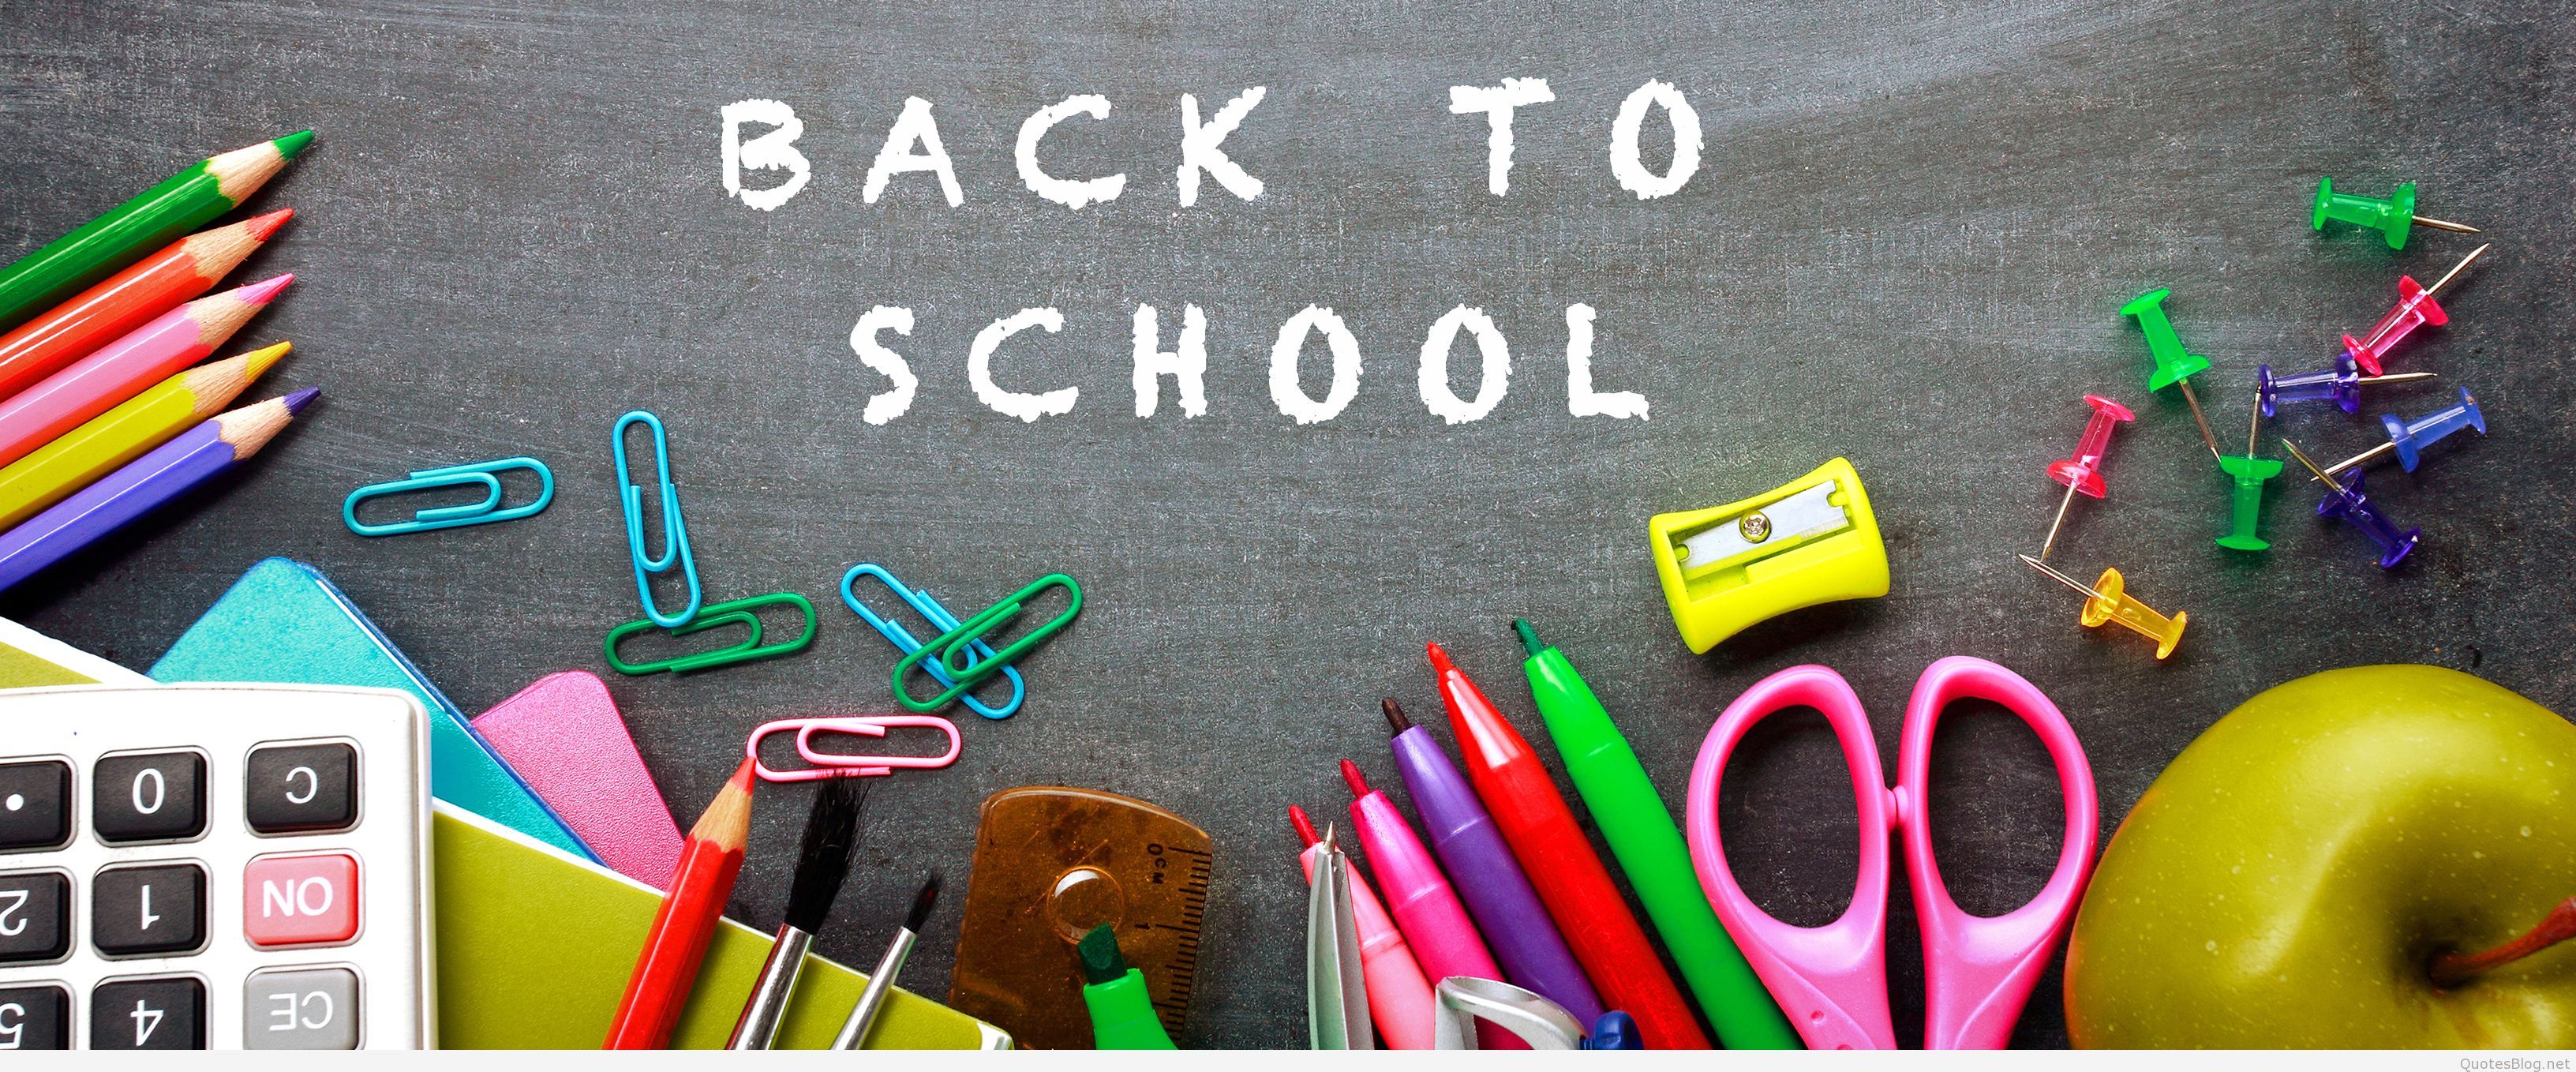 Welcome Back to School Wallpaper Free Welcome Back to School Background